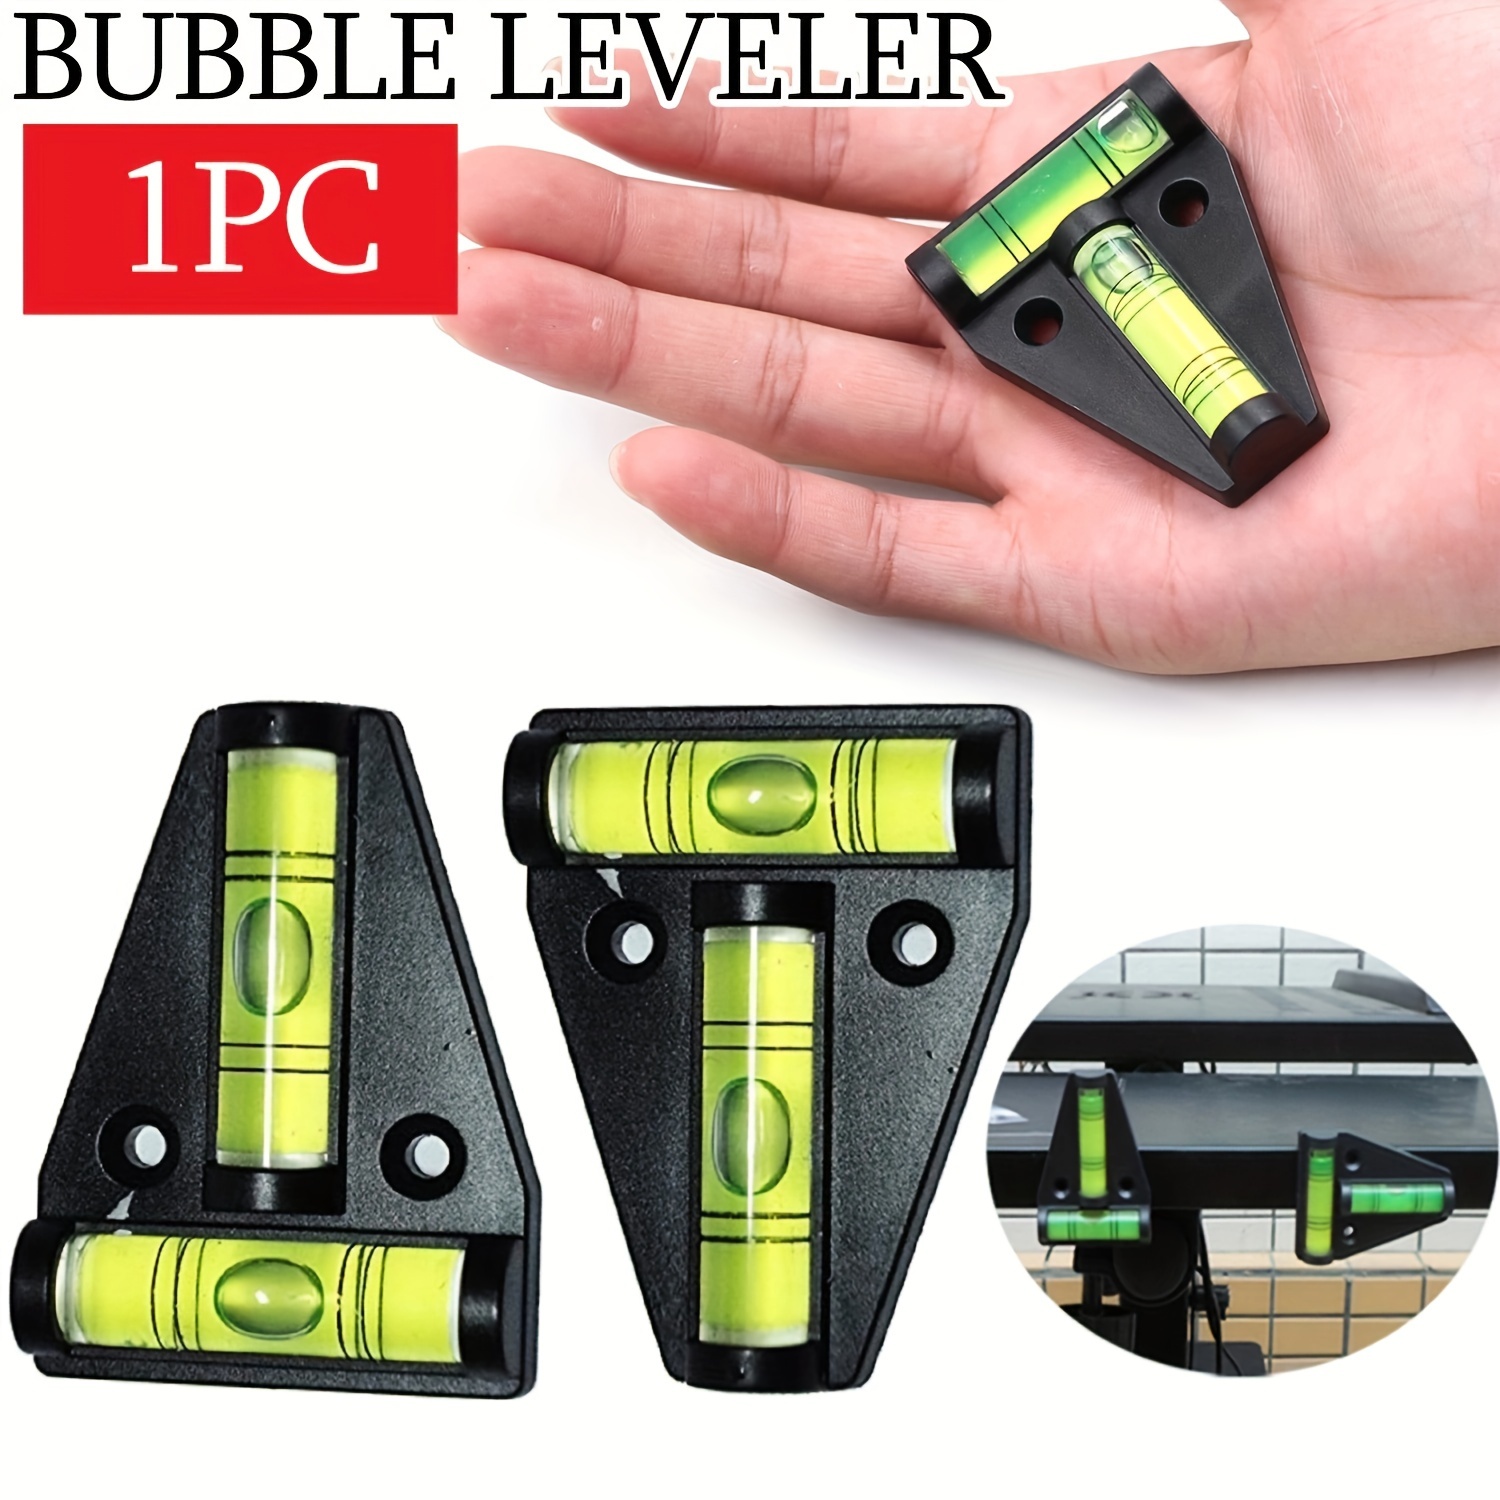 

1pc Triangle Level Portable T Shaped Spirit Level Bubble Working Fixing